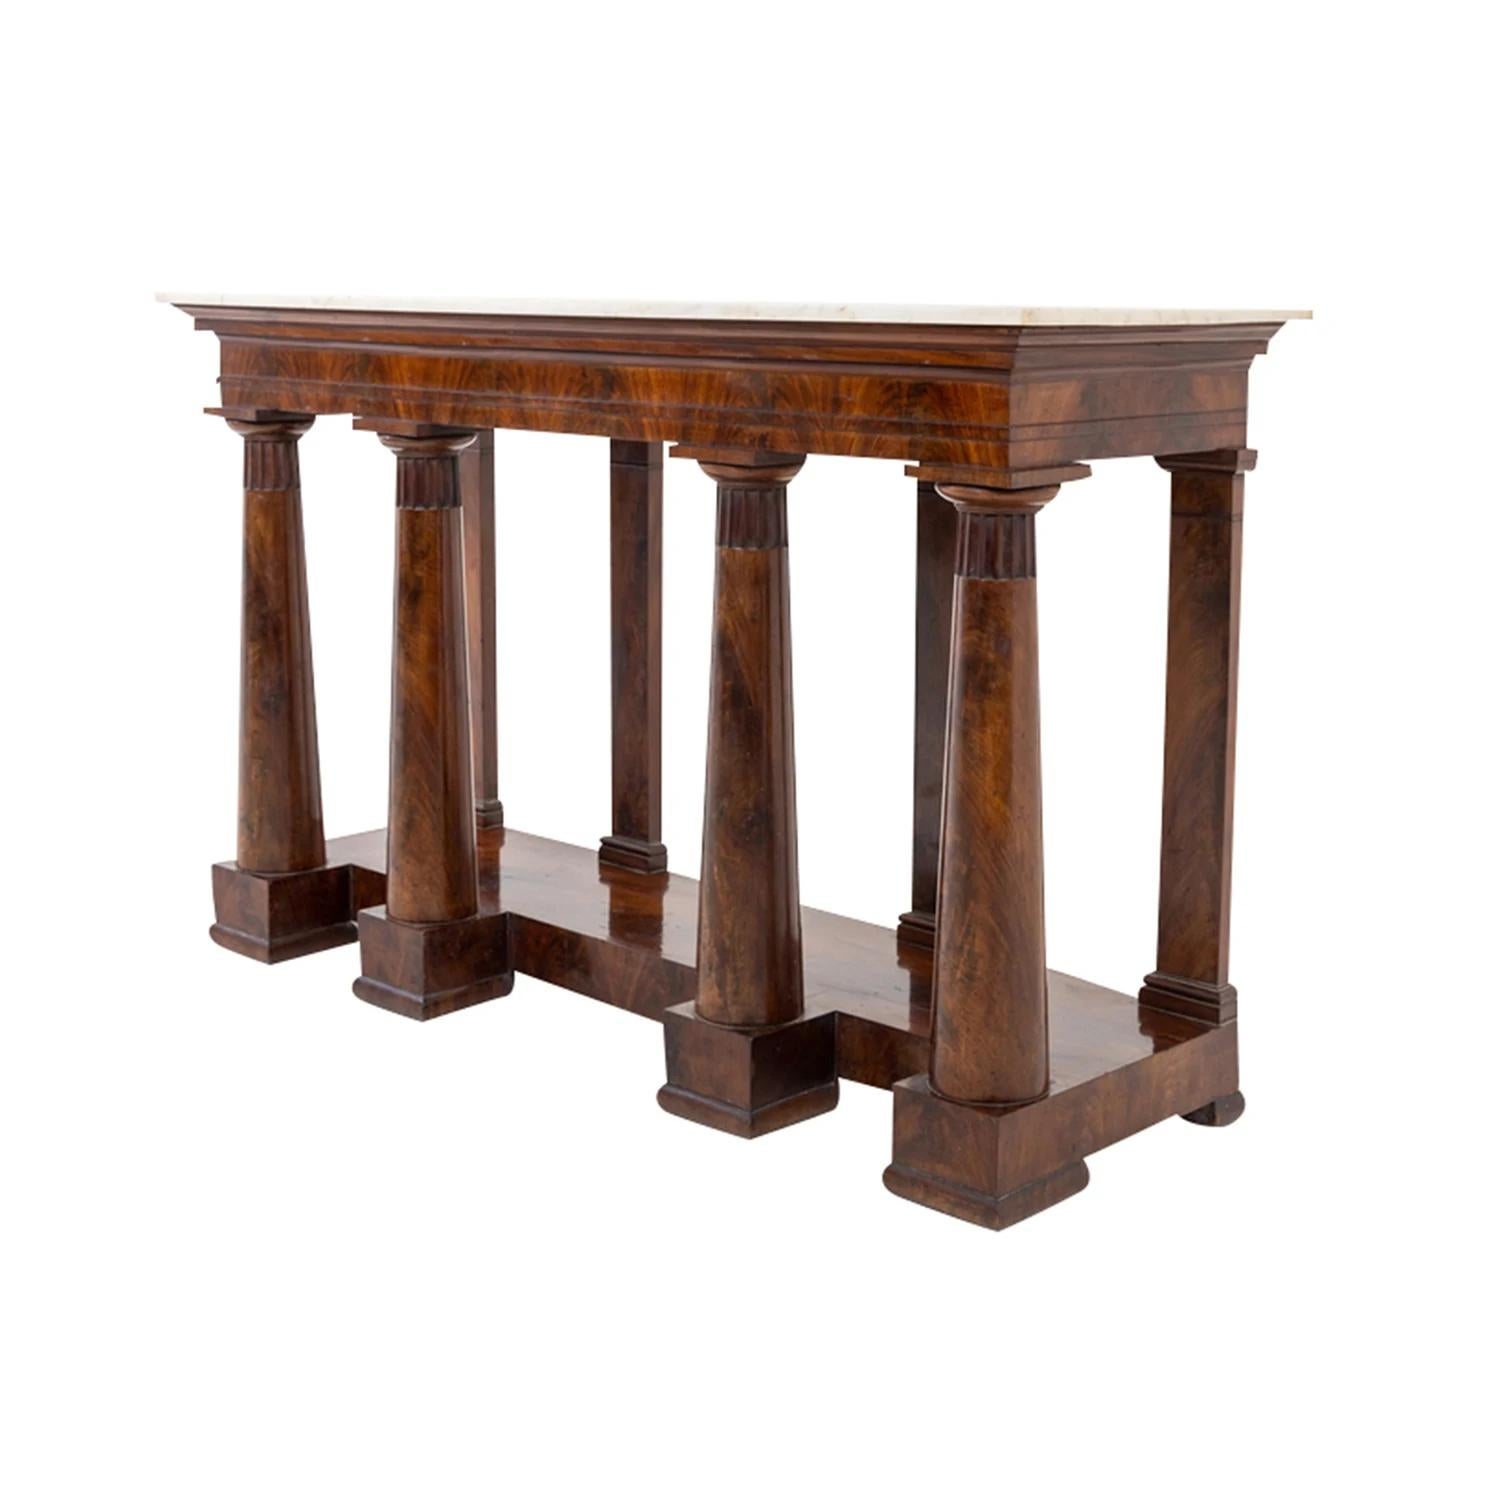 Neoclassical 19th Century Italian Freestanding Mahogany Center Table - Antique Console Table For Sale